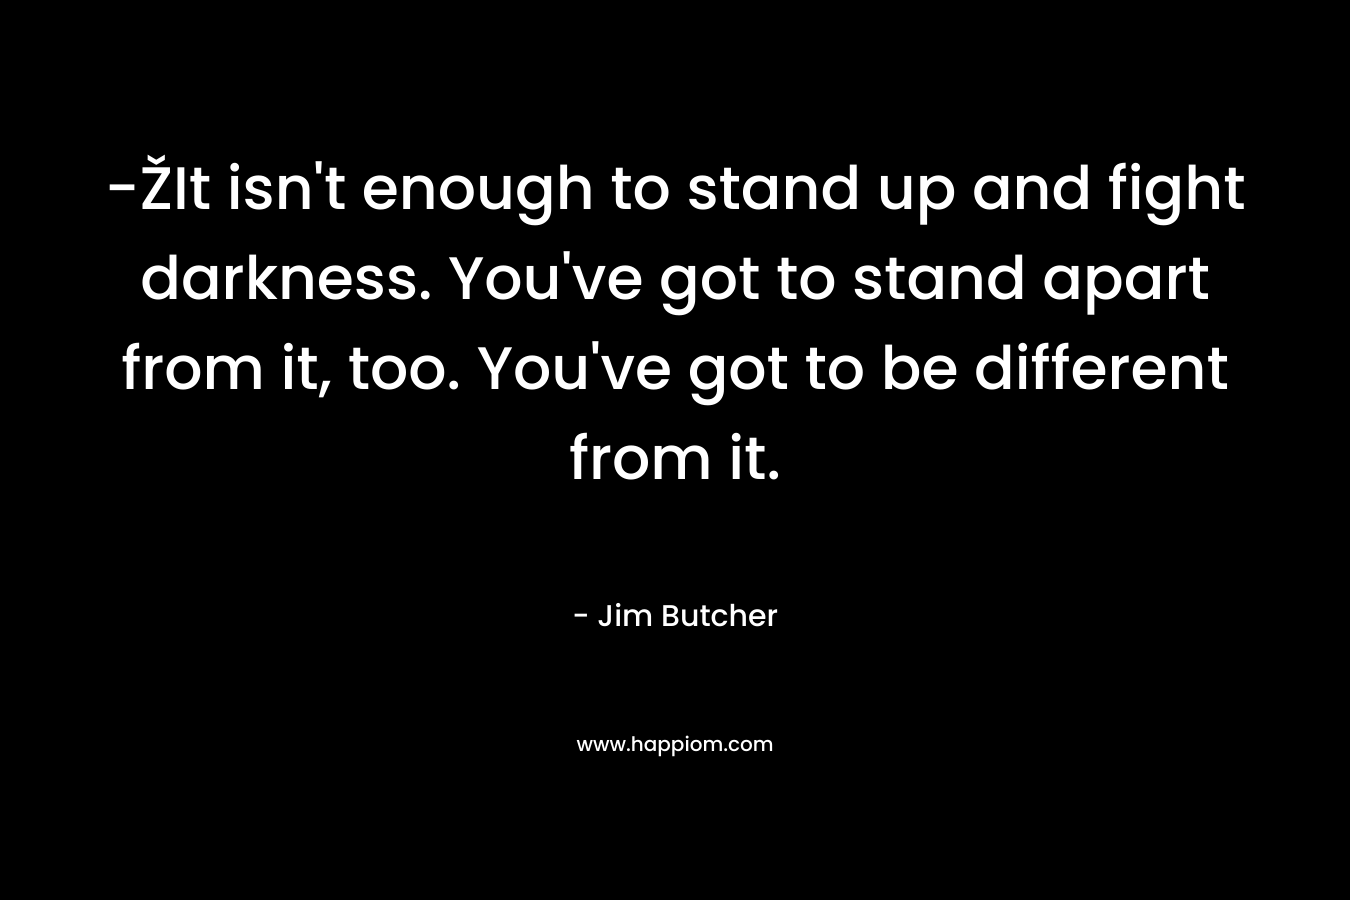 -ŽIt isn't enough to stand up and fight darkness. You've got to stand apart from it, too. You've got to be different from it.